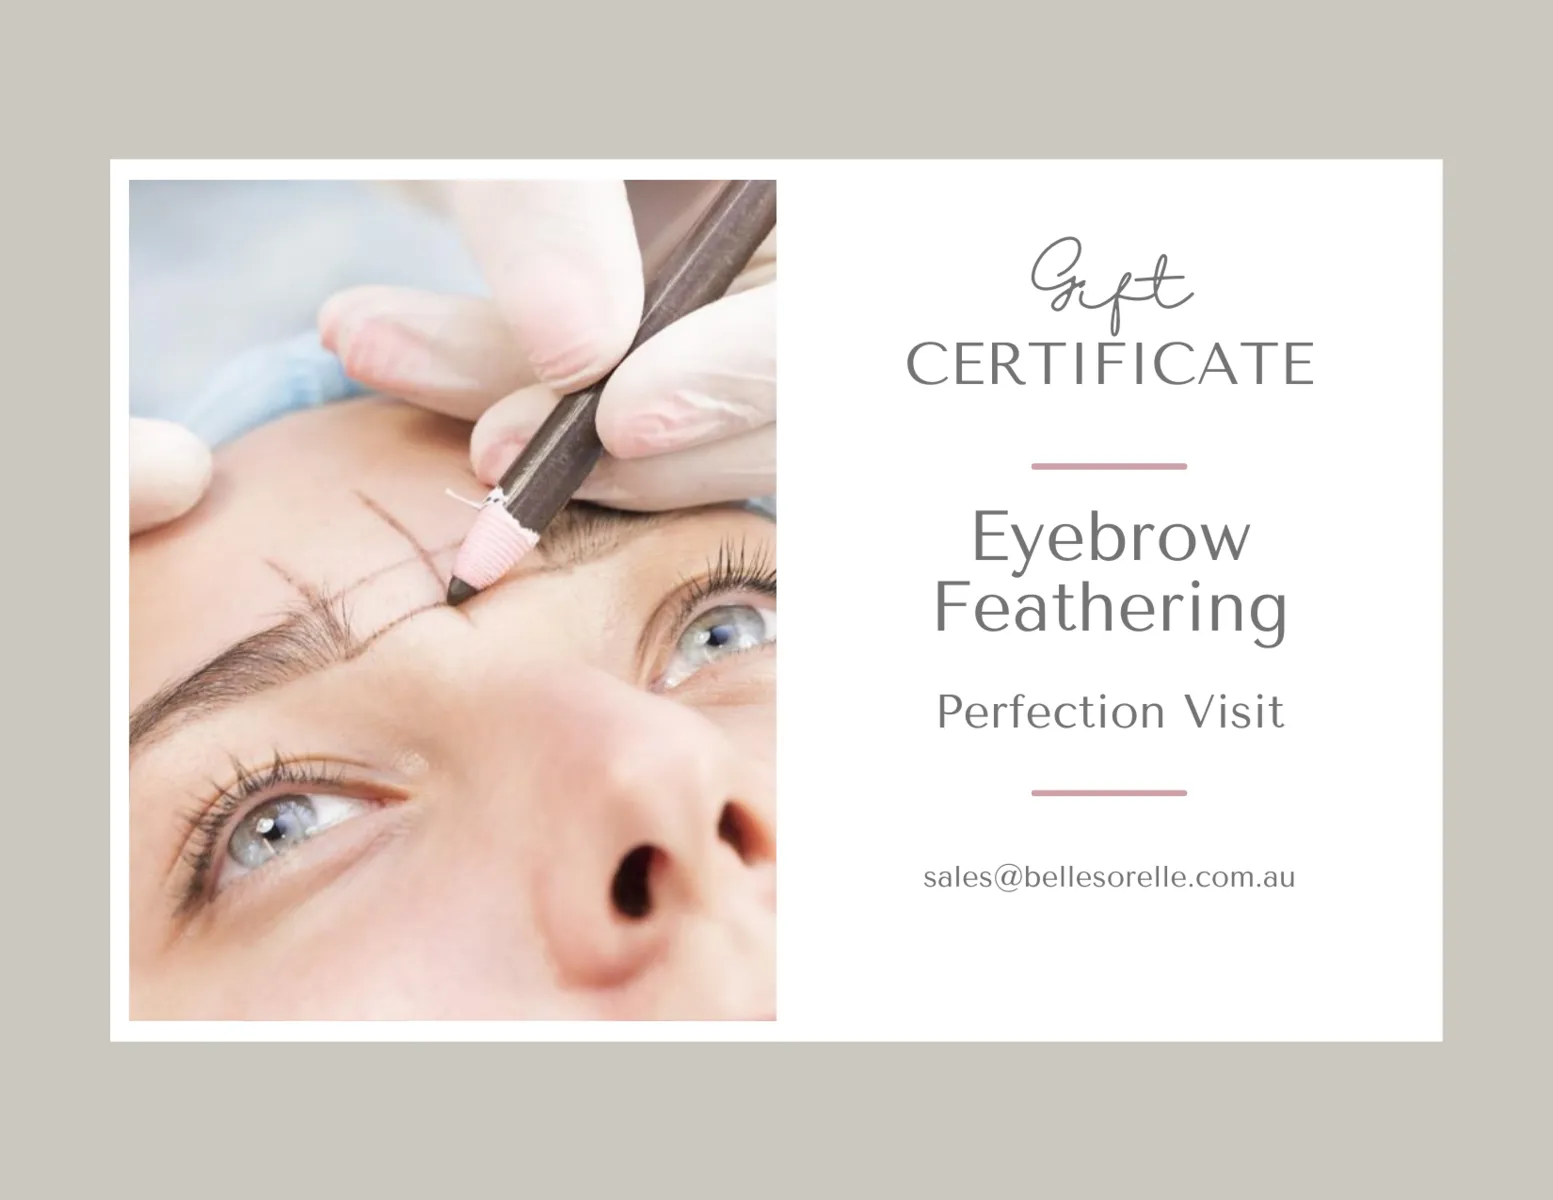 Eyebrow Feathering - Perfection Visit